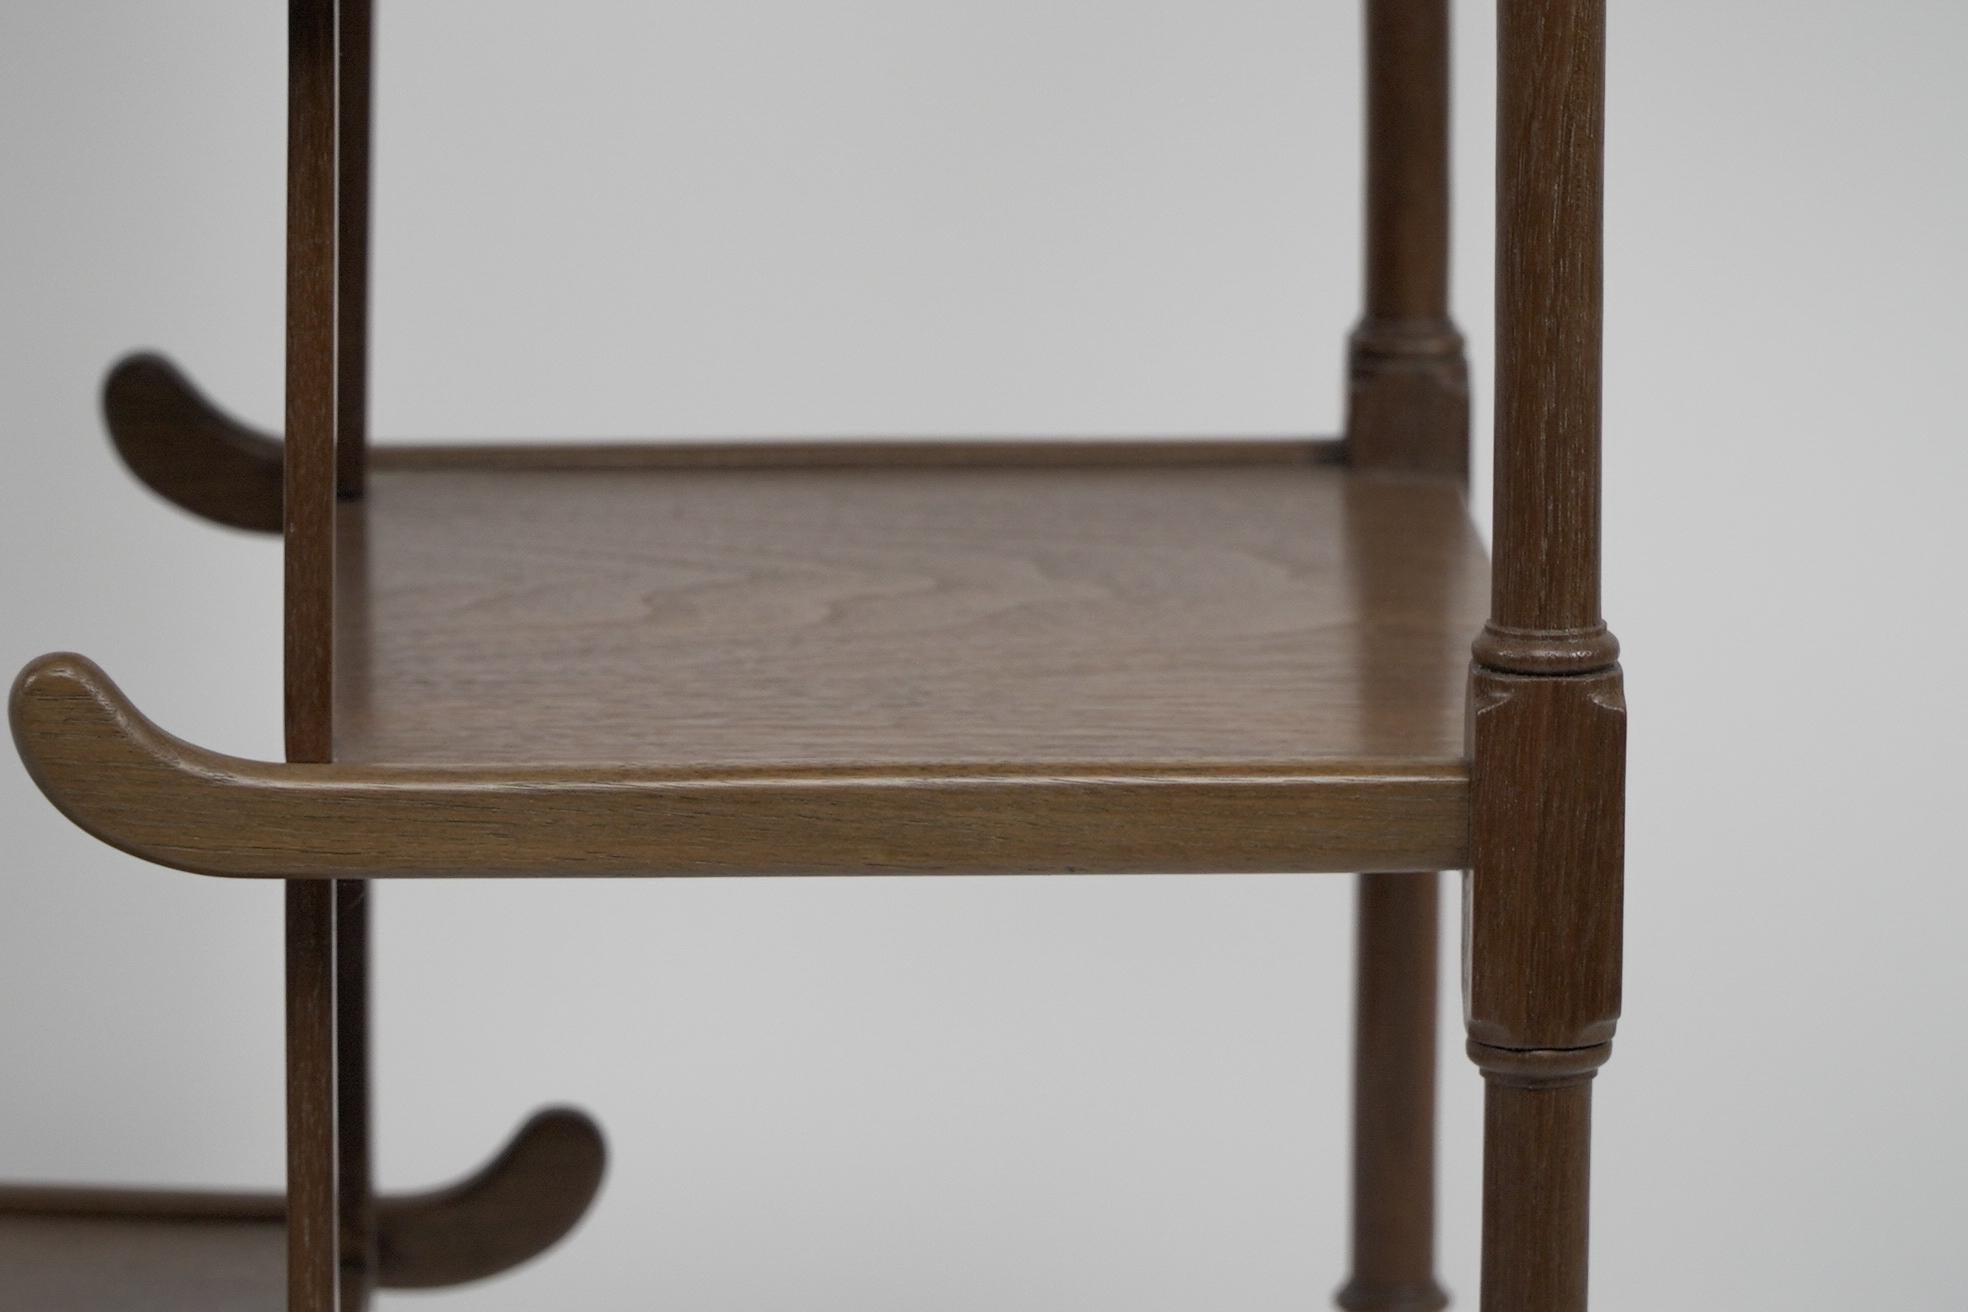 An Anglo-Japanese beech wood side table with fretwork &pagoda style turned rails For Sale 8